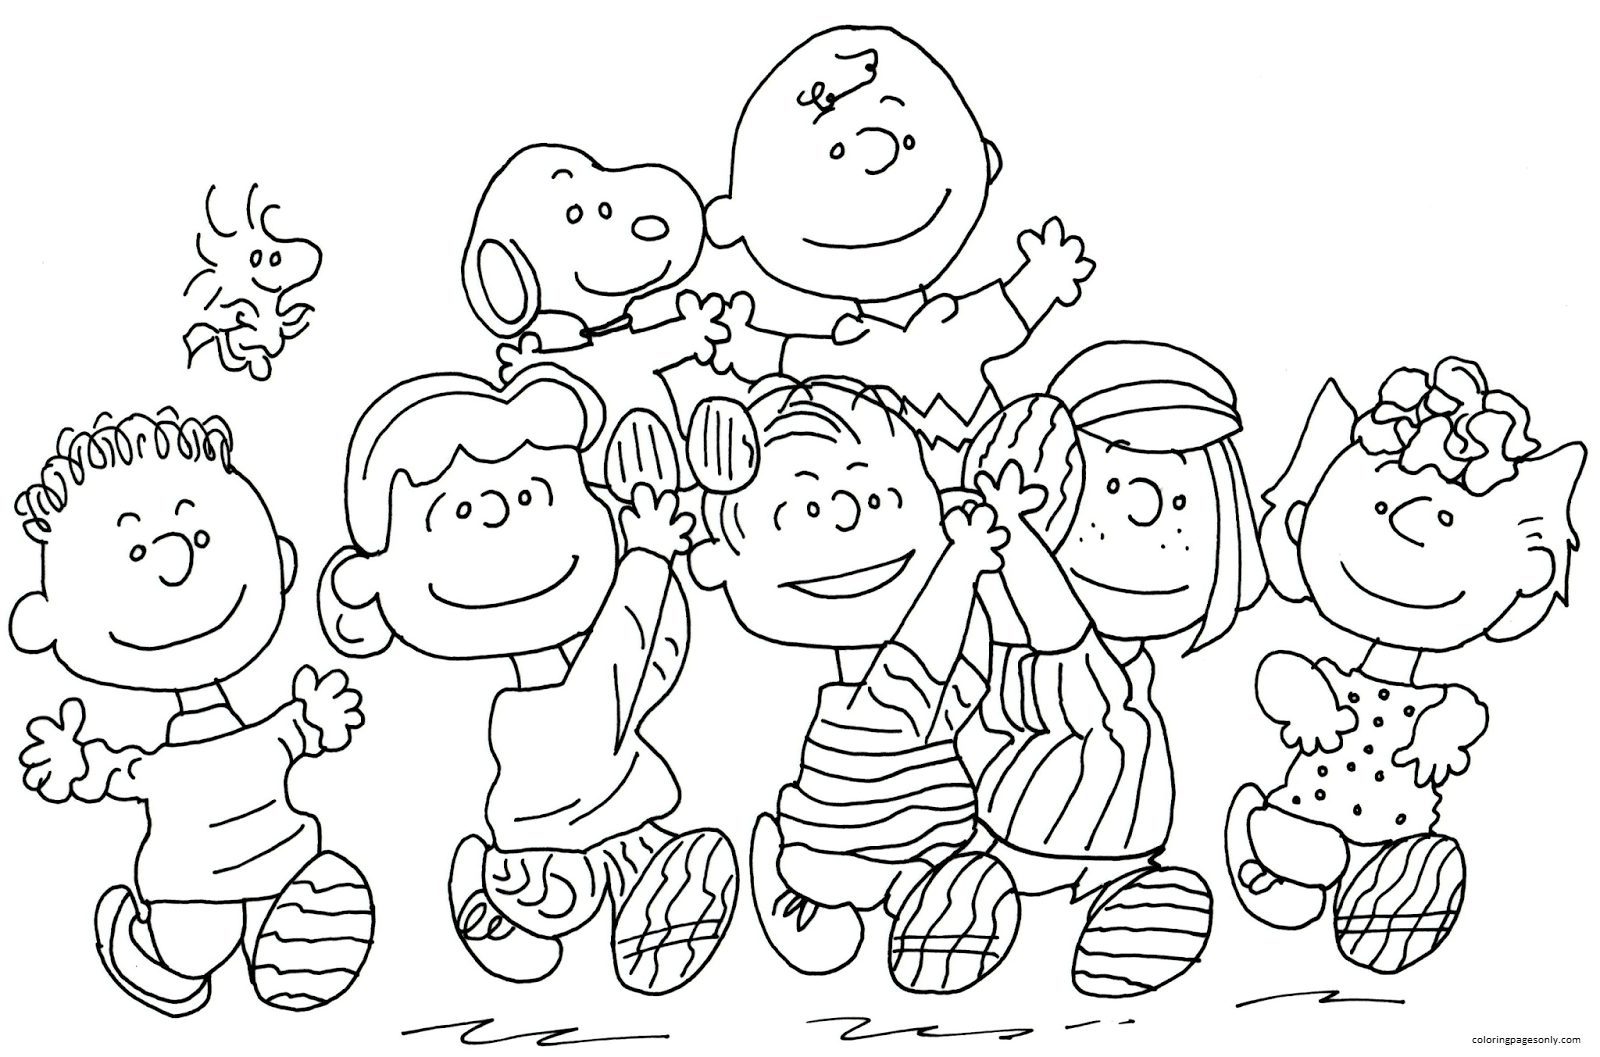 Charlie Brown Snoopy And Peanuts Coloring Page